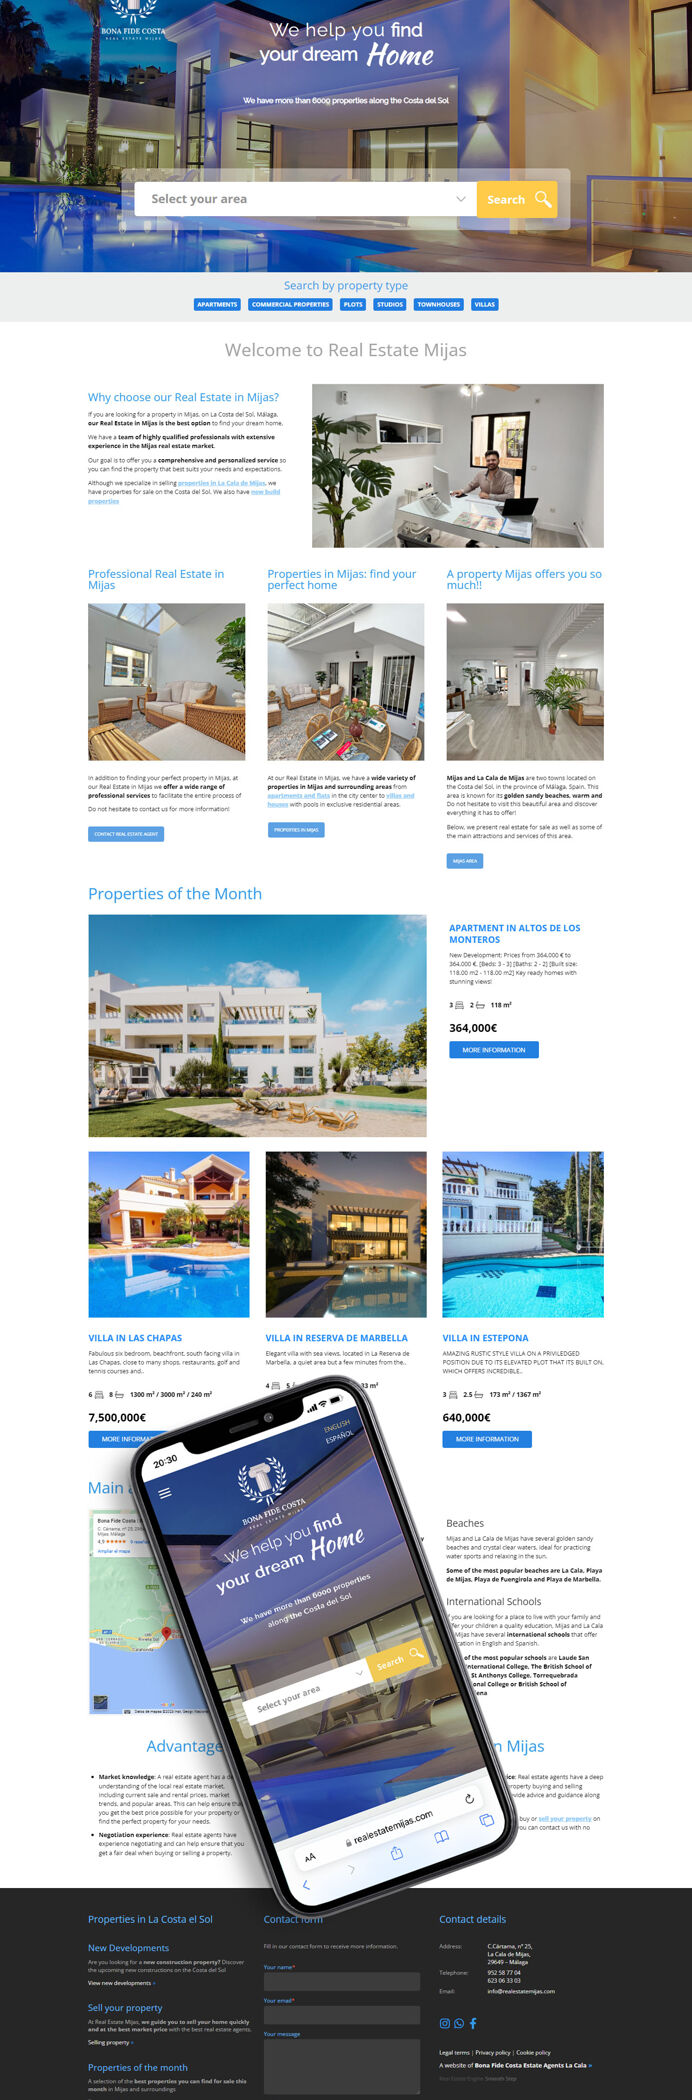 Real estate website development for an agency in Mijas based on our exclusive design